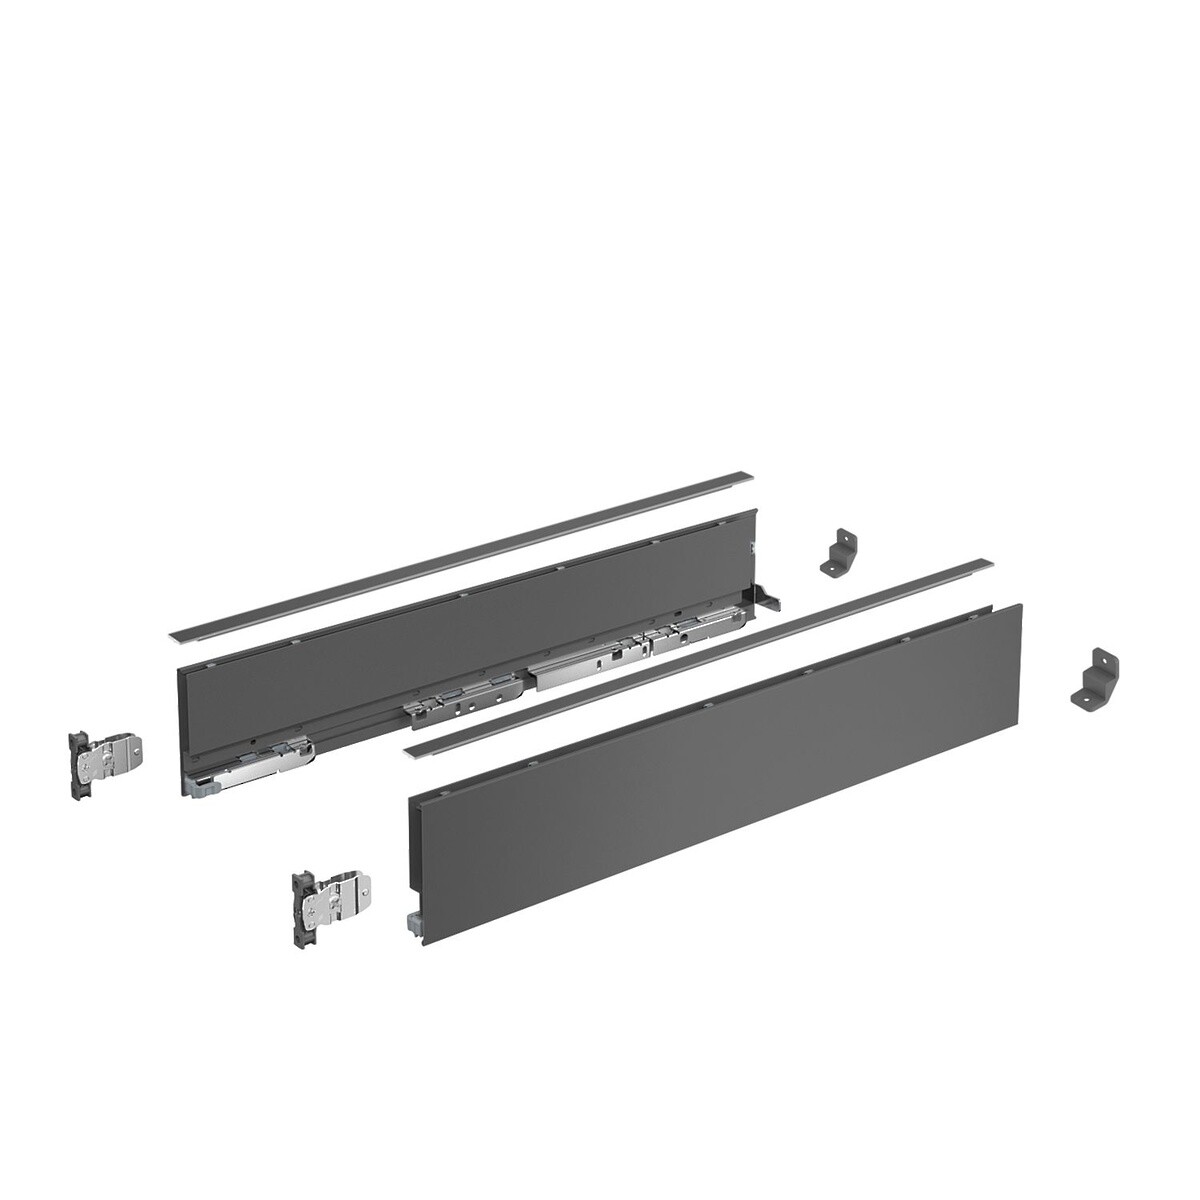 AvanTech YOU Drawer side profile set, height 101 mm x NL 270 mm, Anthracite, Left and Right